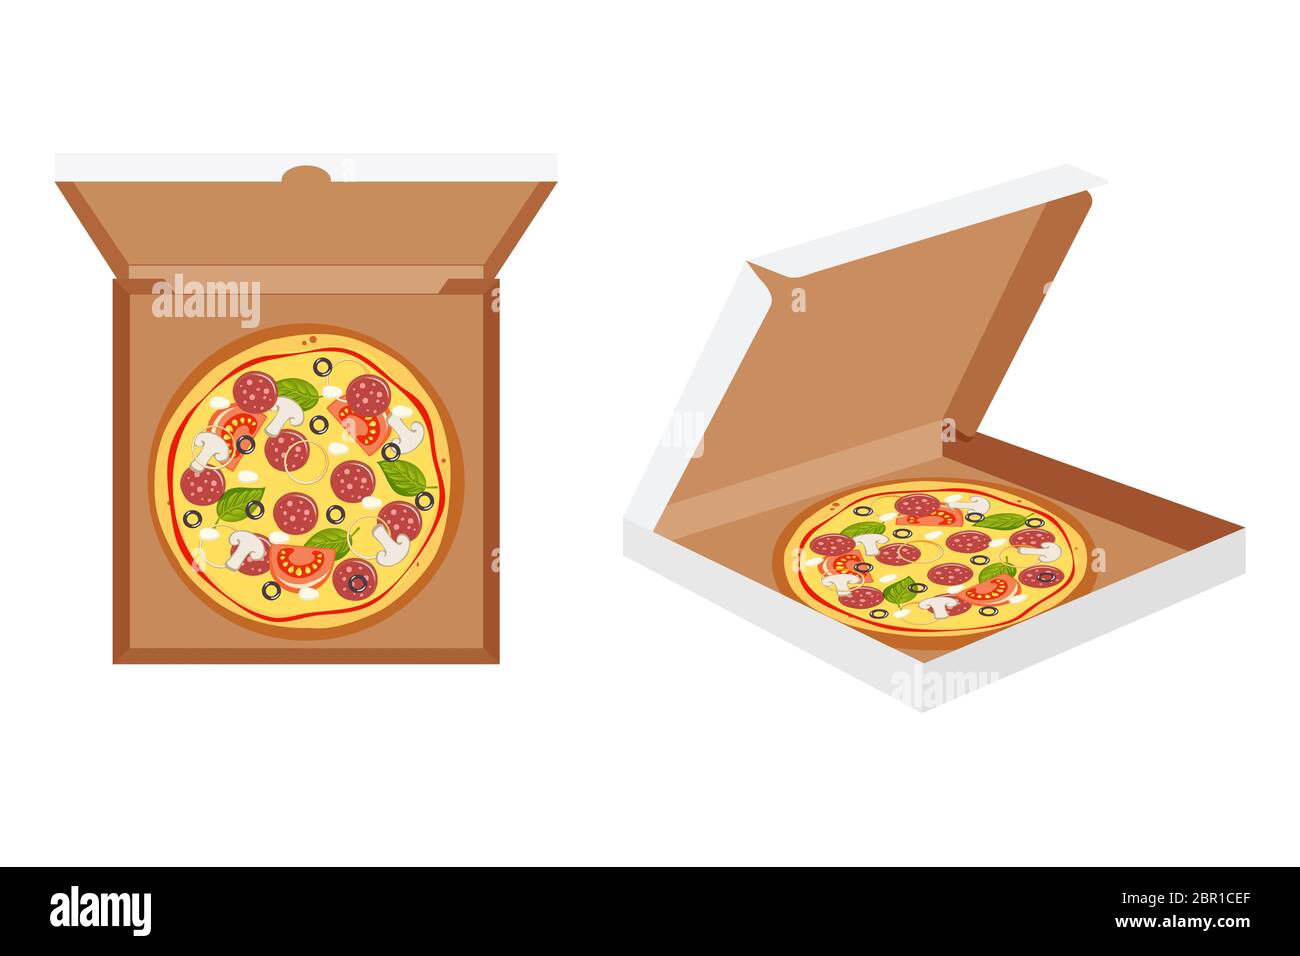 Pizza in box isolated on white background Stock Vector